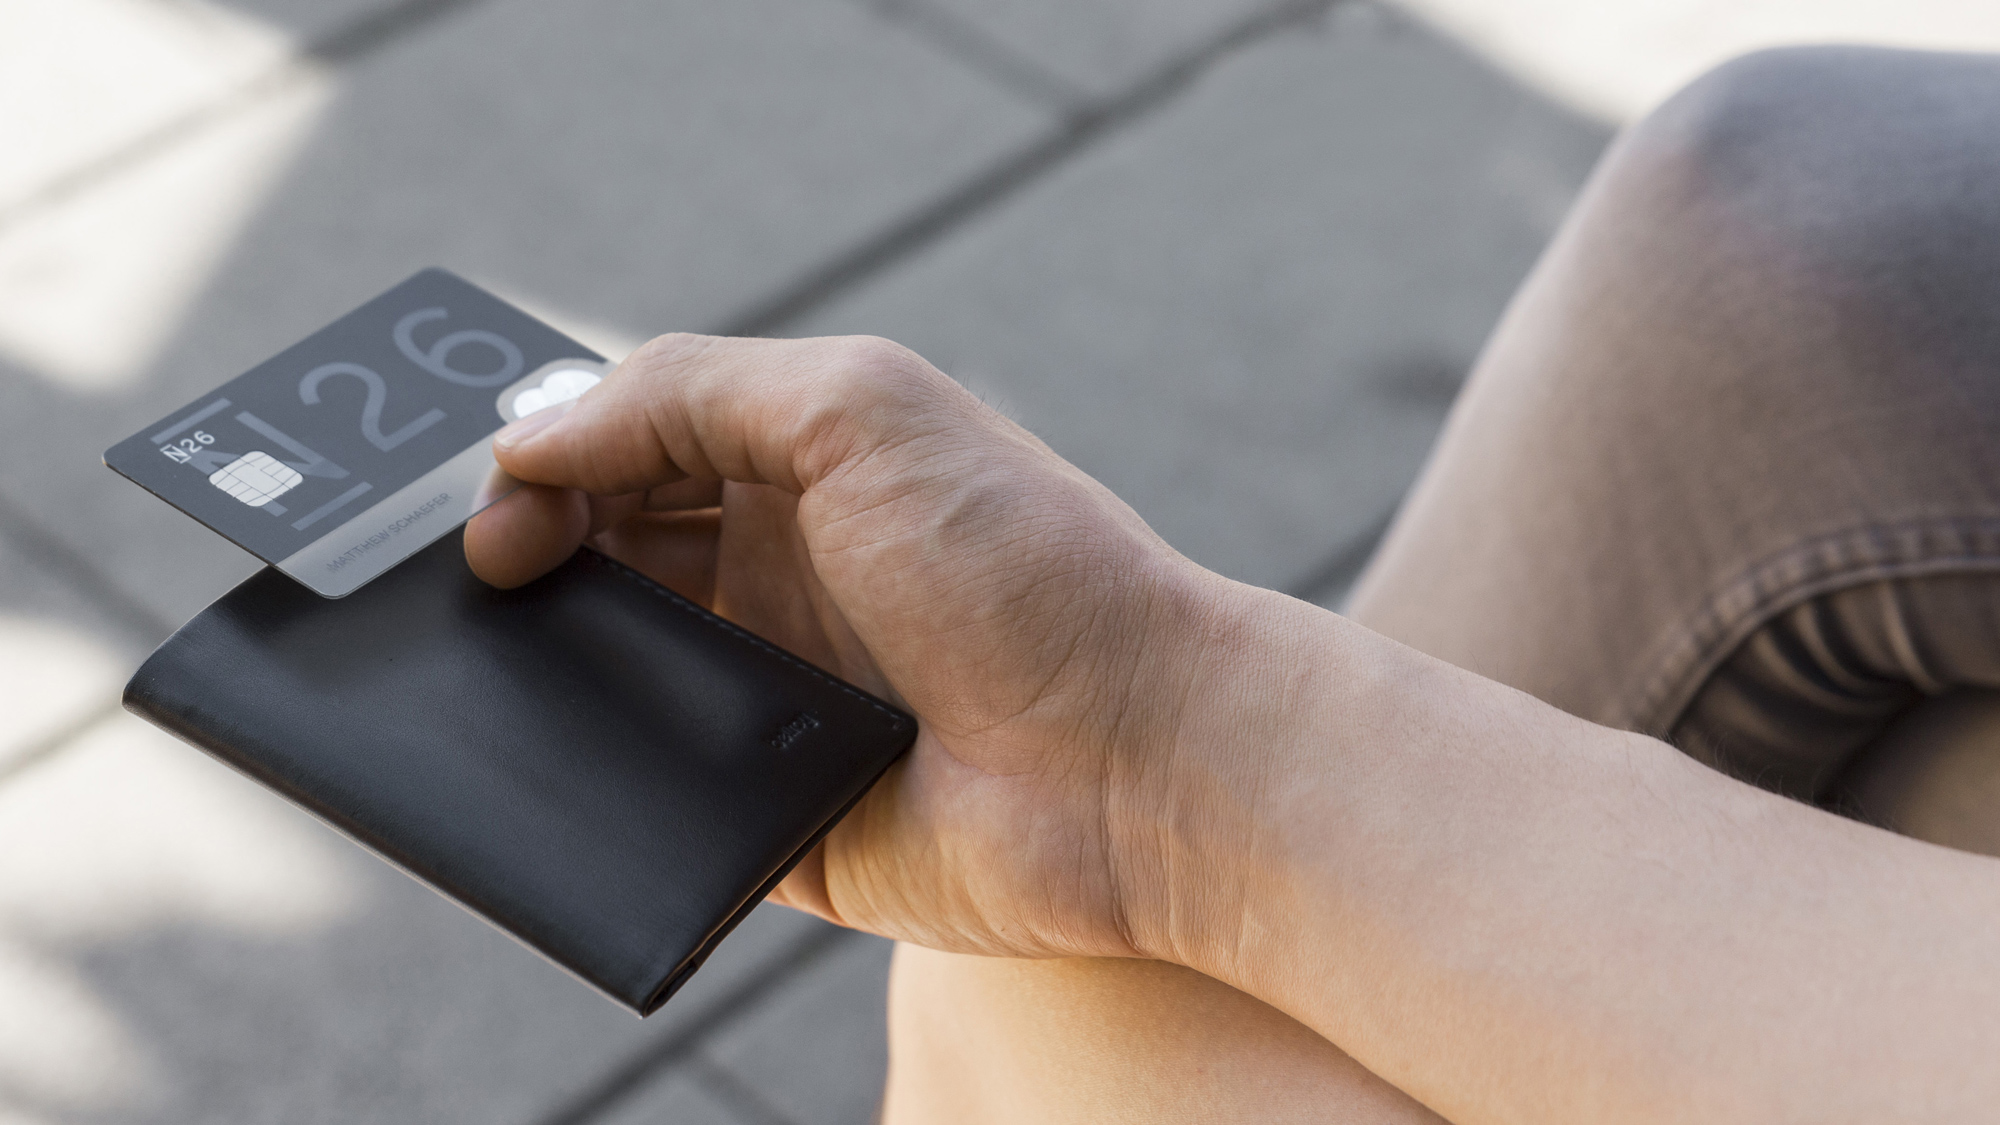 N26 Press Image of a person holding a Black Card